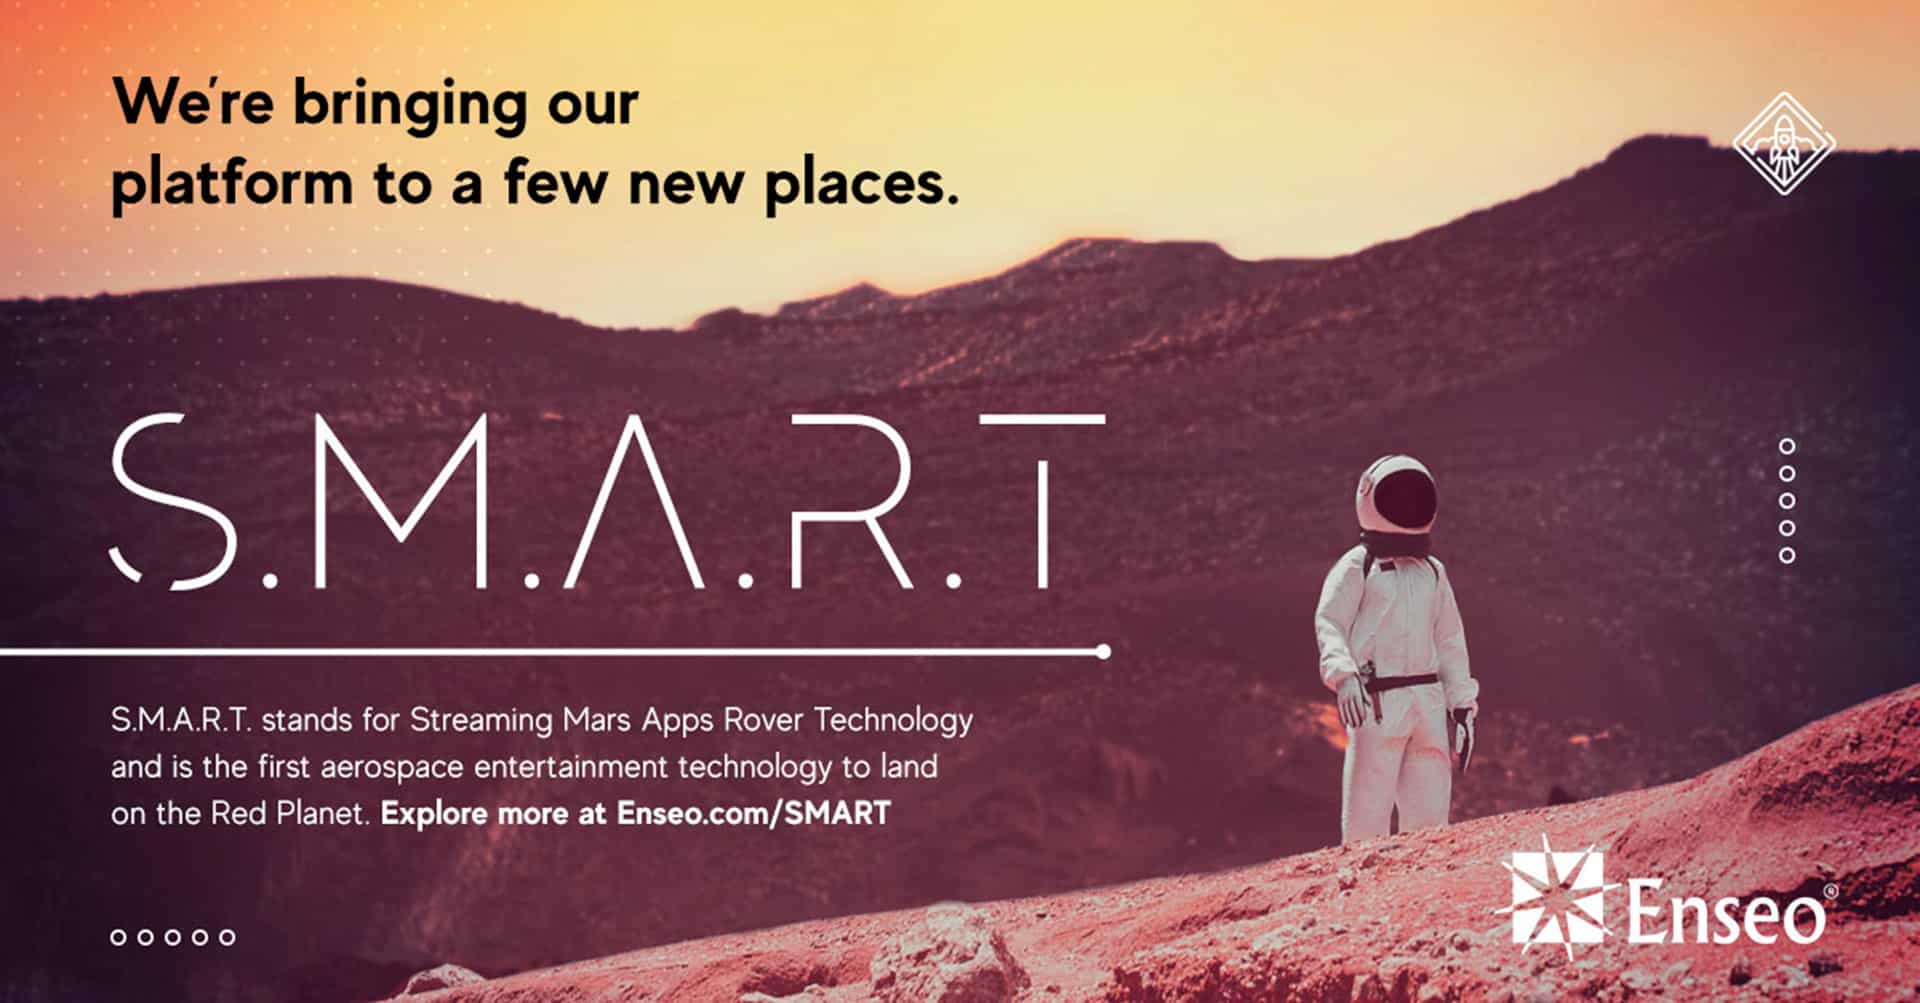 Image of Mars with an astronaut standing on the planet surface that says: We're bringing our platform to a few new places. S.M.A.R.T